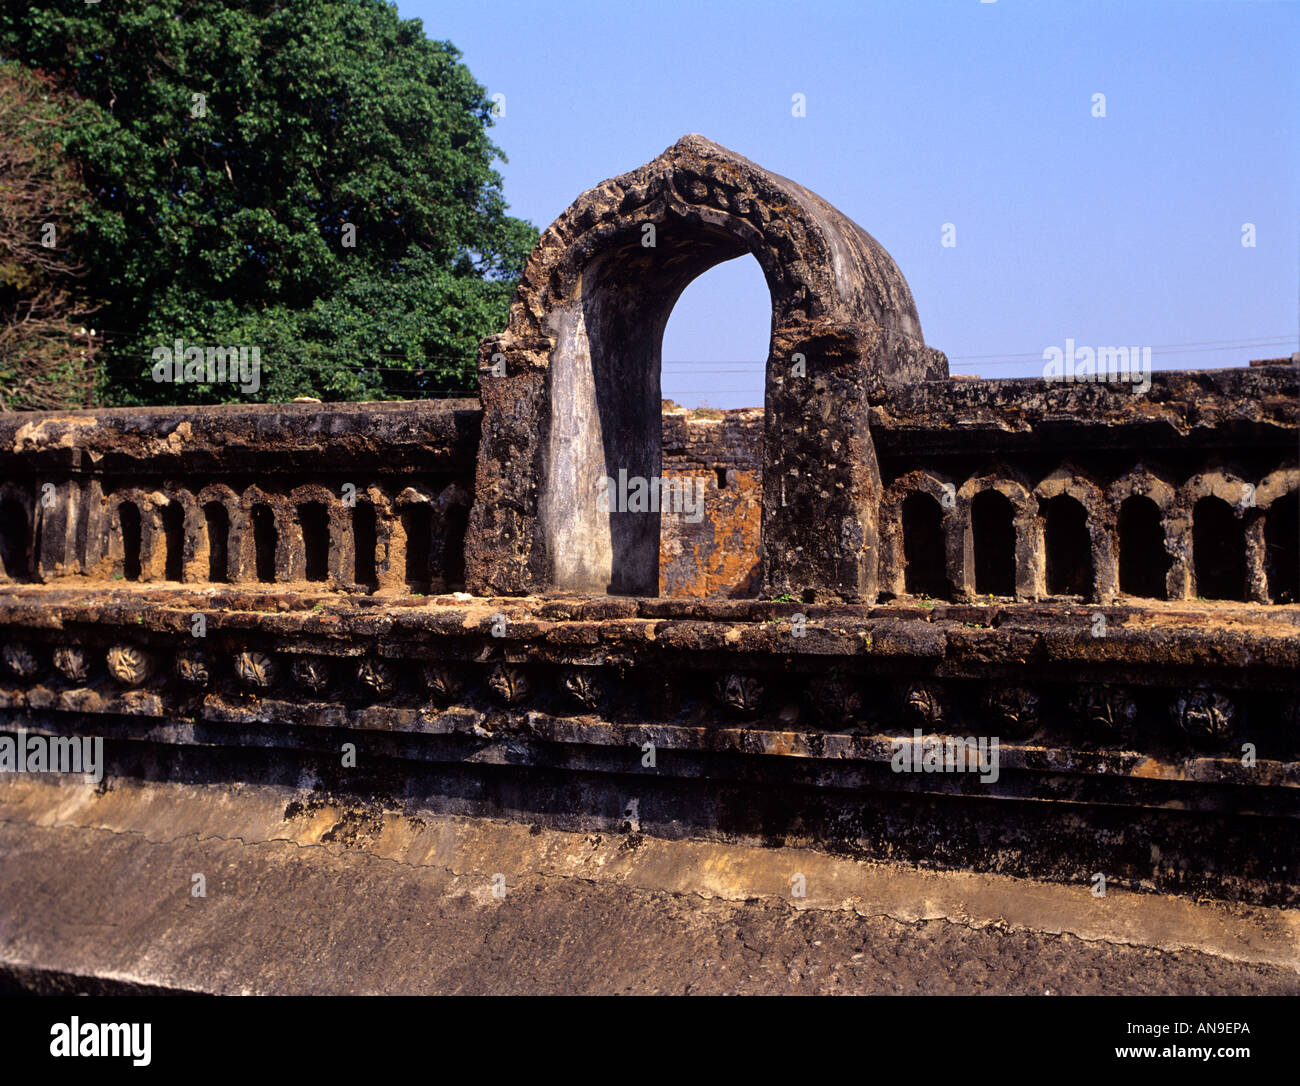 TIPPU SULTHANS FORT IN PALAKKAD KERALA Foto Stock